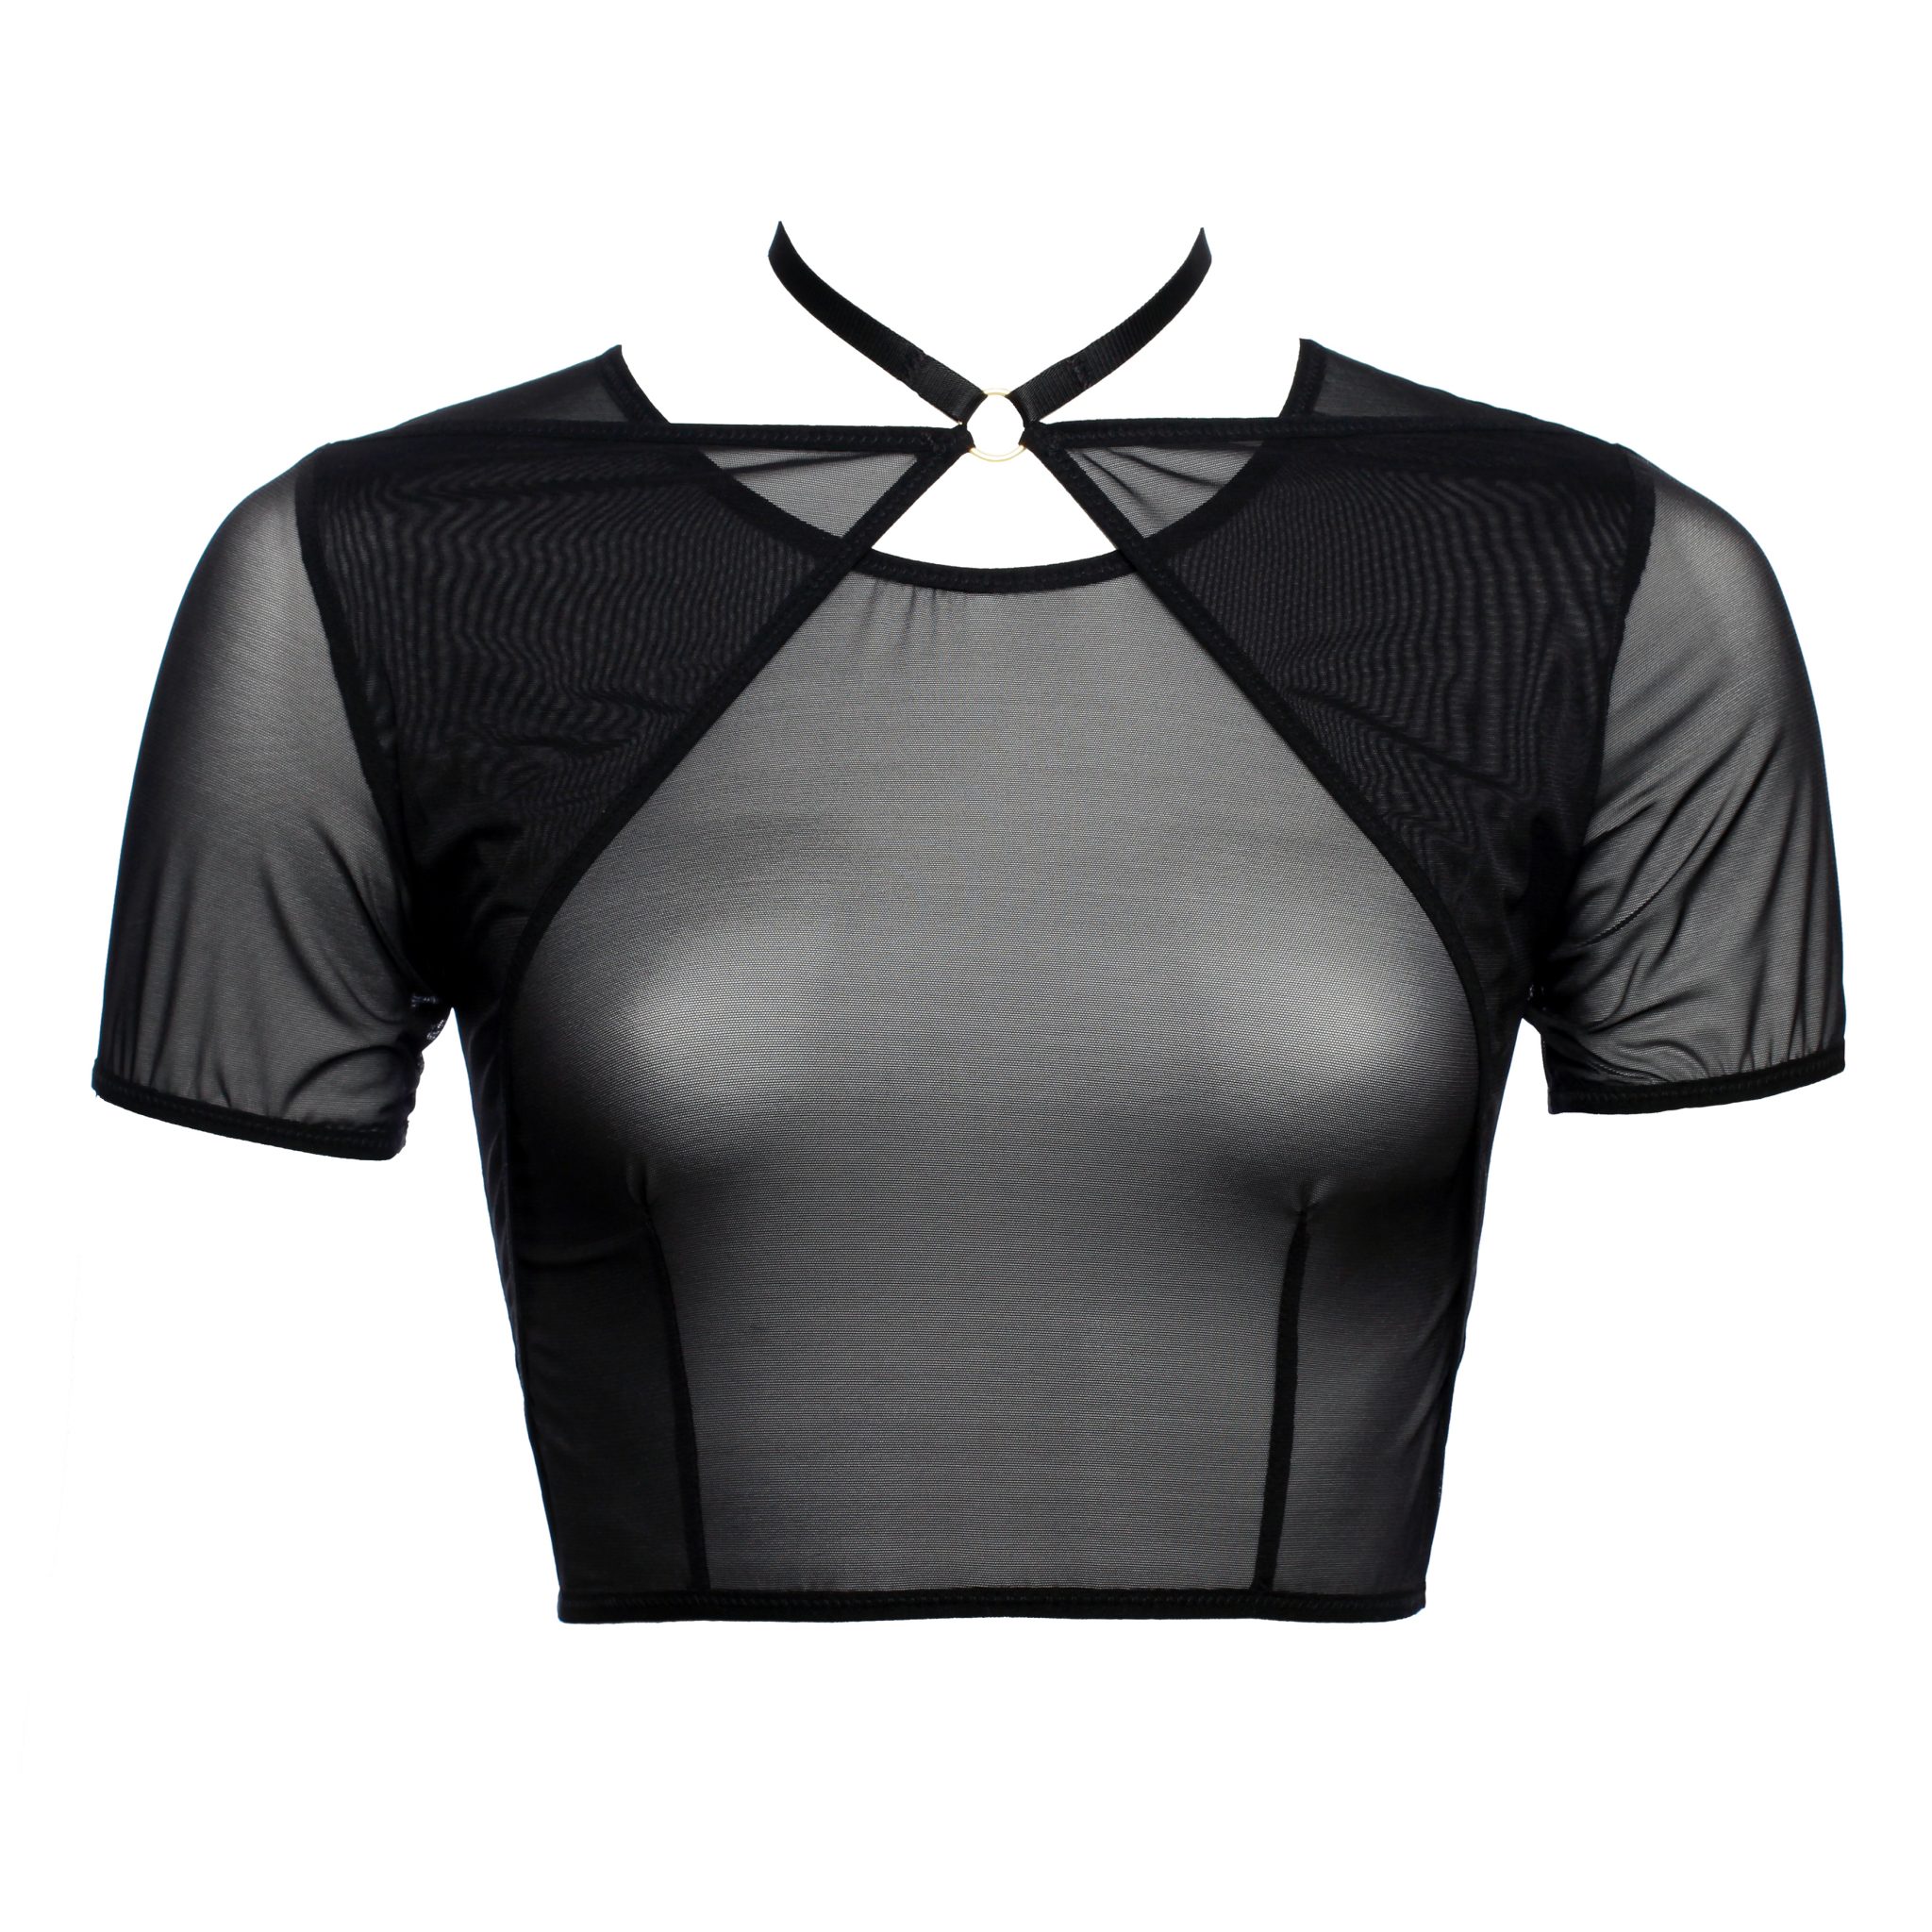 Black Mesh Choker Crop Top With Short Sleeves by Flash